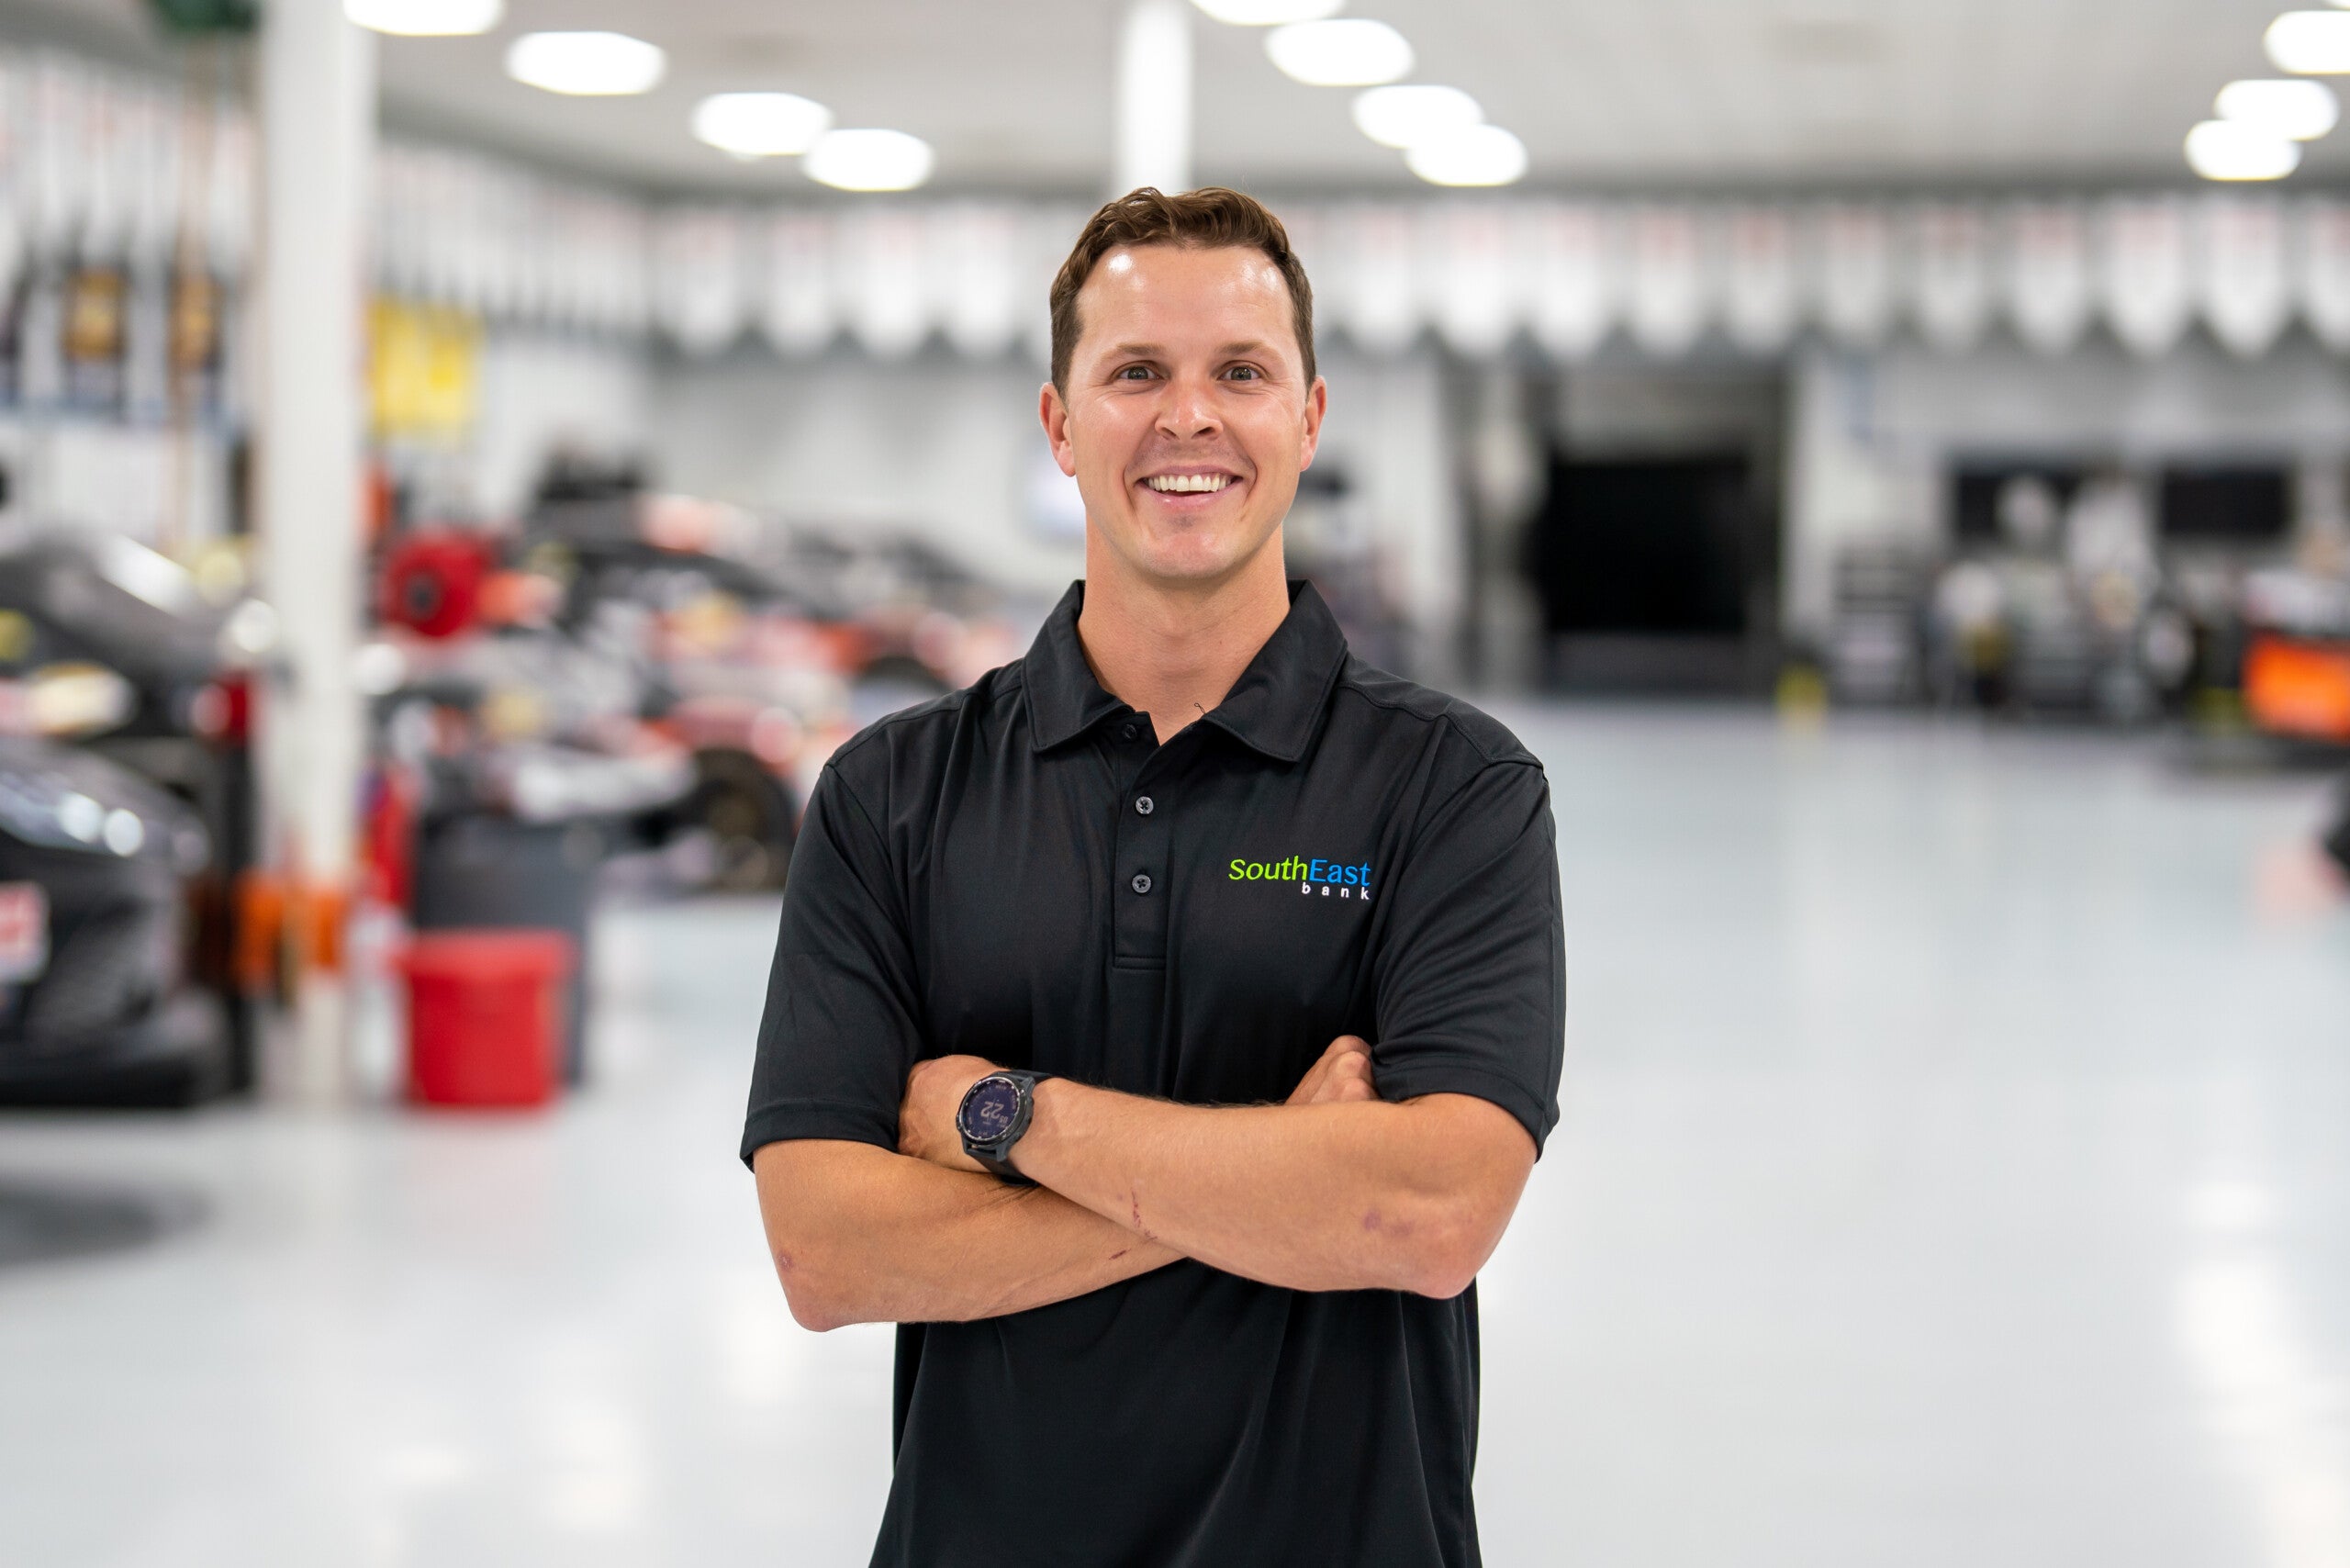 SouthEast Bank Partners with NASCAR Driver Trevor Bayne to Show Why They’re “Good to Know”